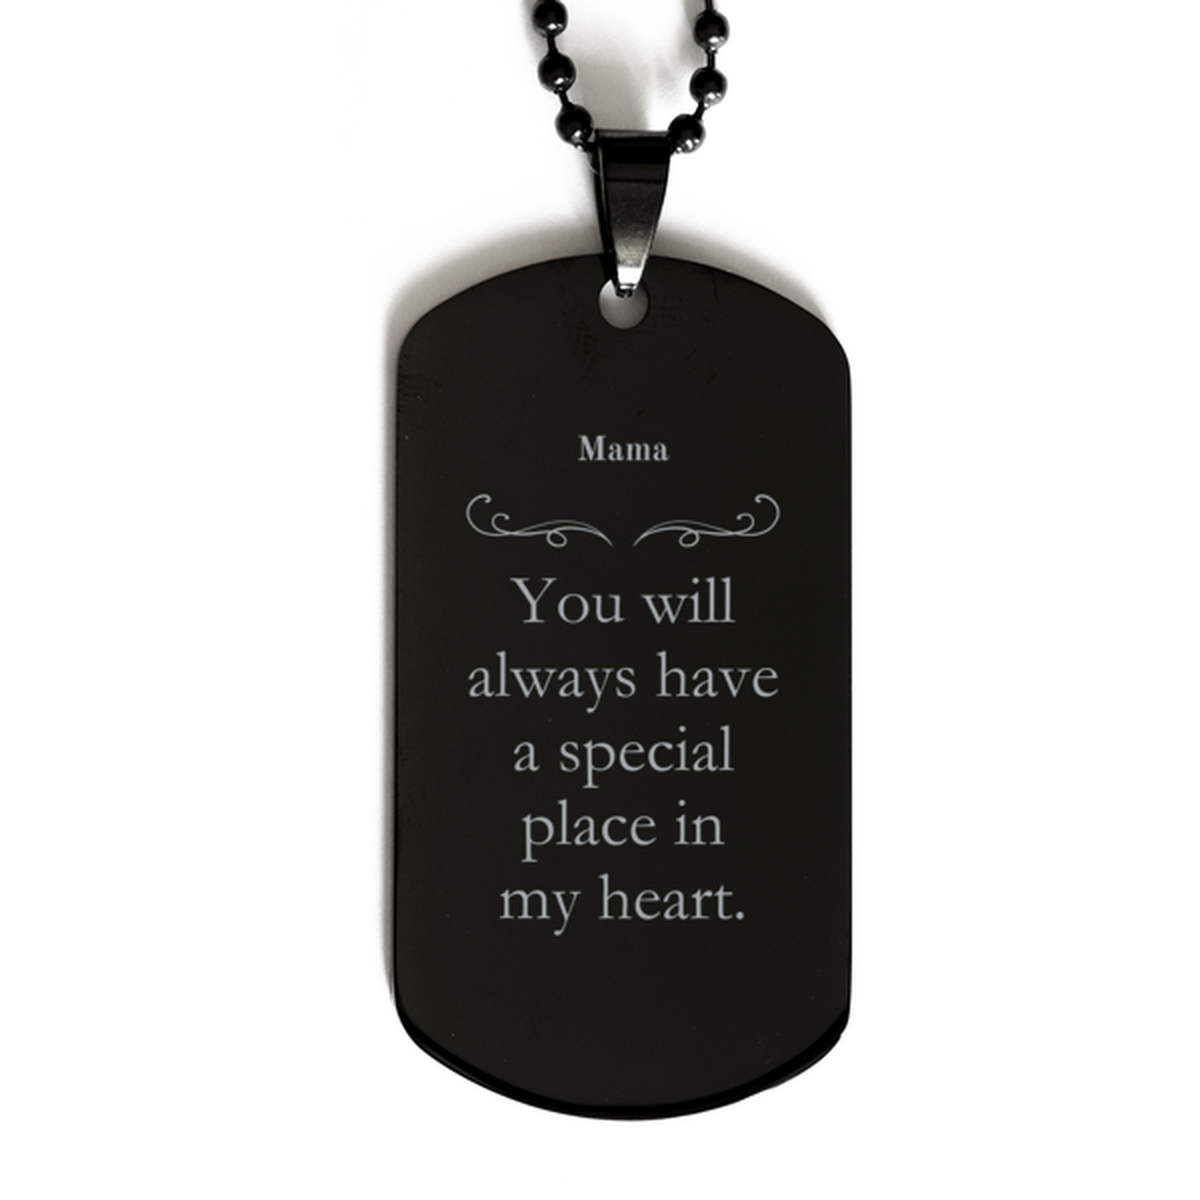 Personalized Black Dog Tag for Mama - Engraved Heartfelt Mama, Mothers Day Gift, Dog Tag Necklace for Women, Unique Jewelry for Mama, Christmas Gift for Mom